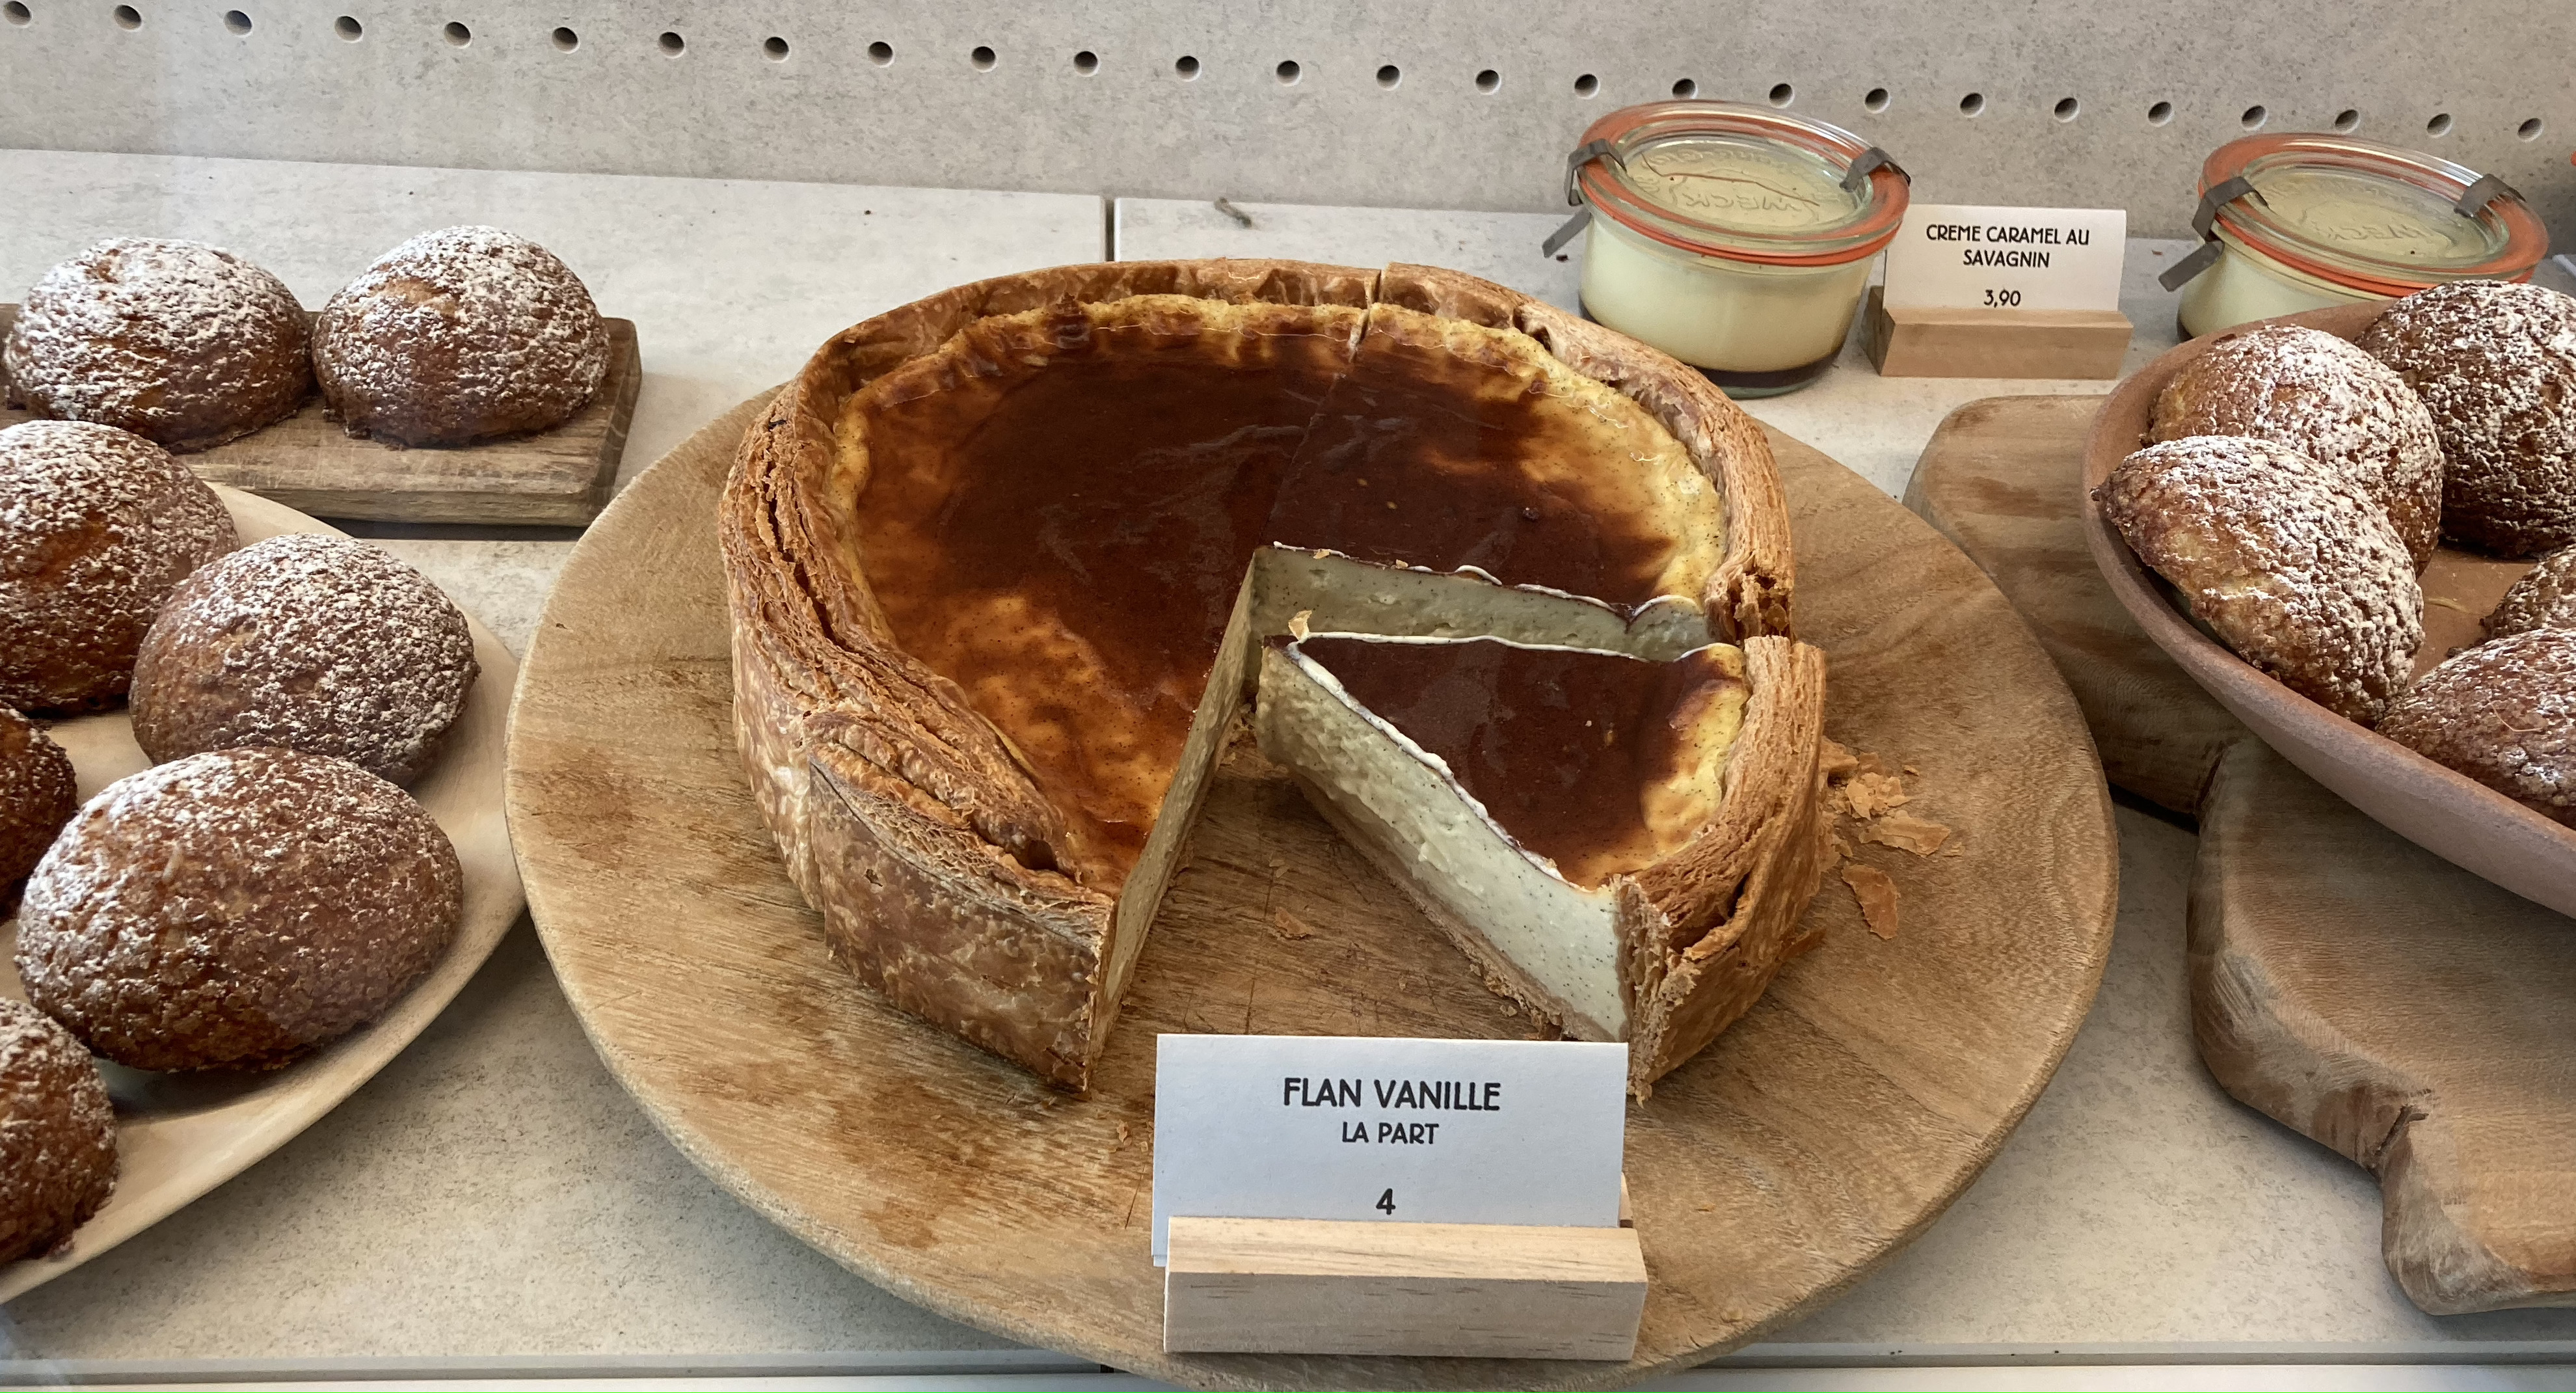 A whole, creamy vanilla flan with one piece missing in the vitrine of Tapisserie in the the 7th arrondissement.